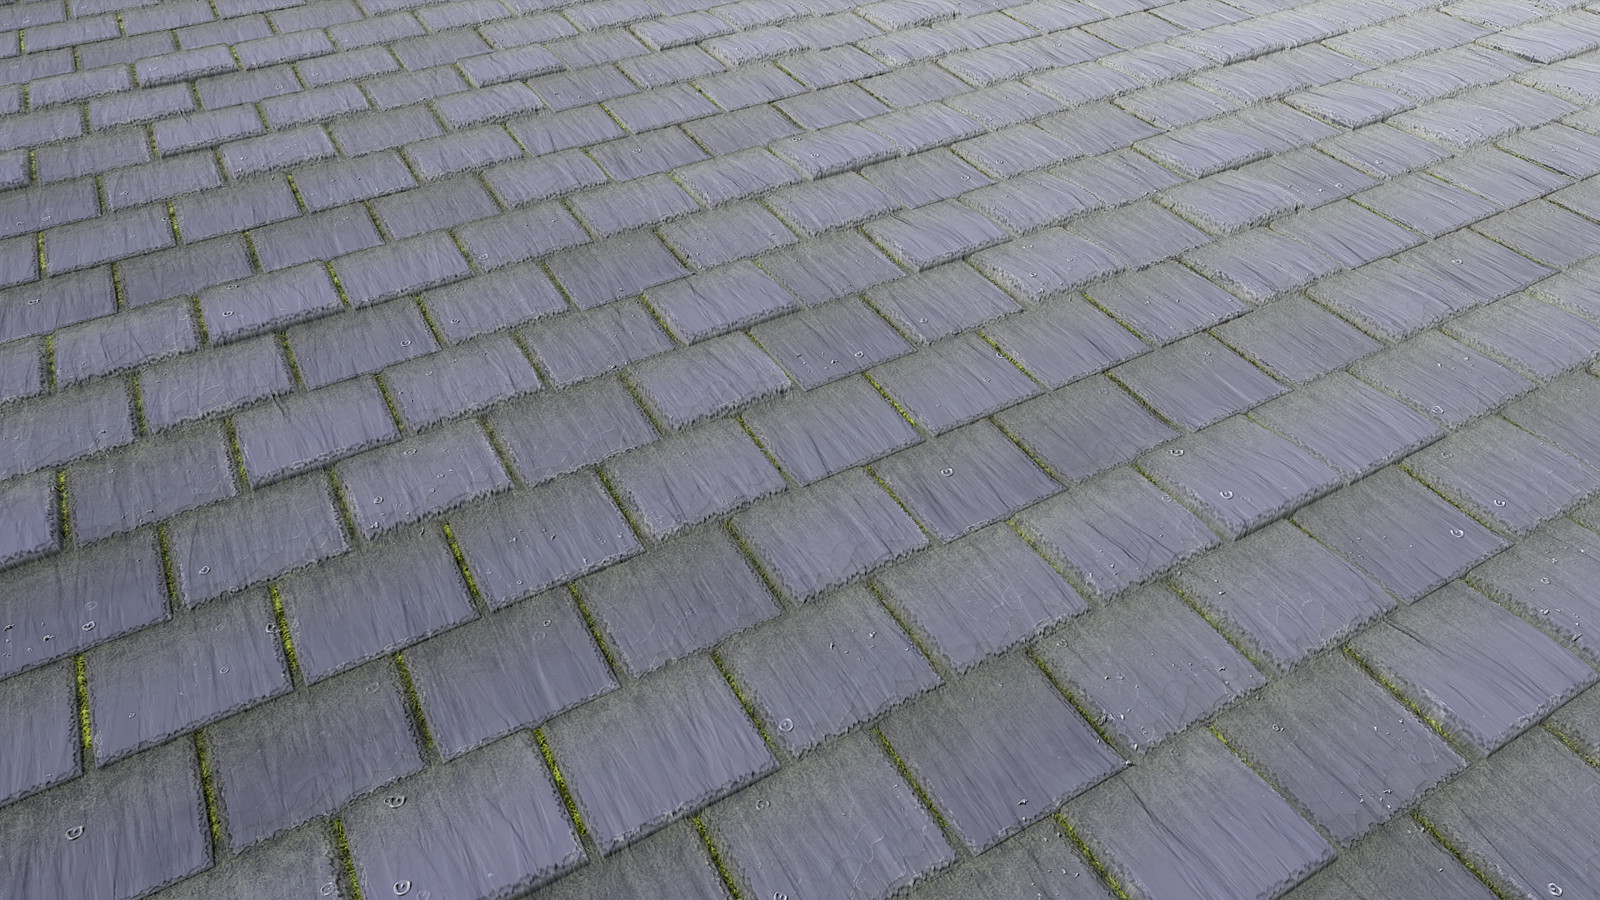 Mossy Concrete Roof Material